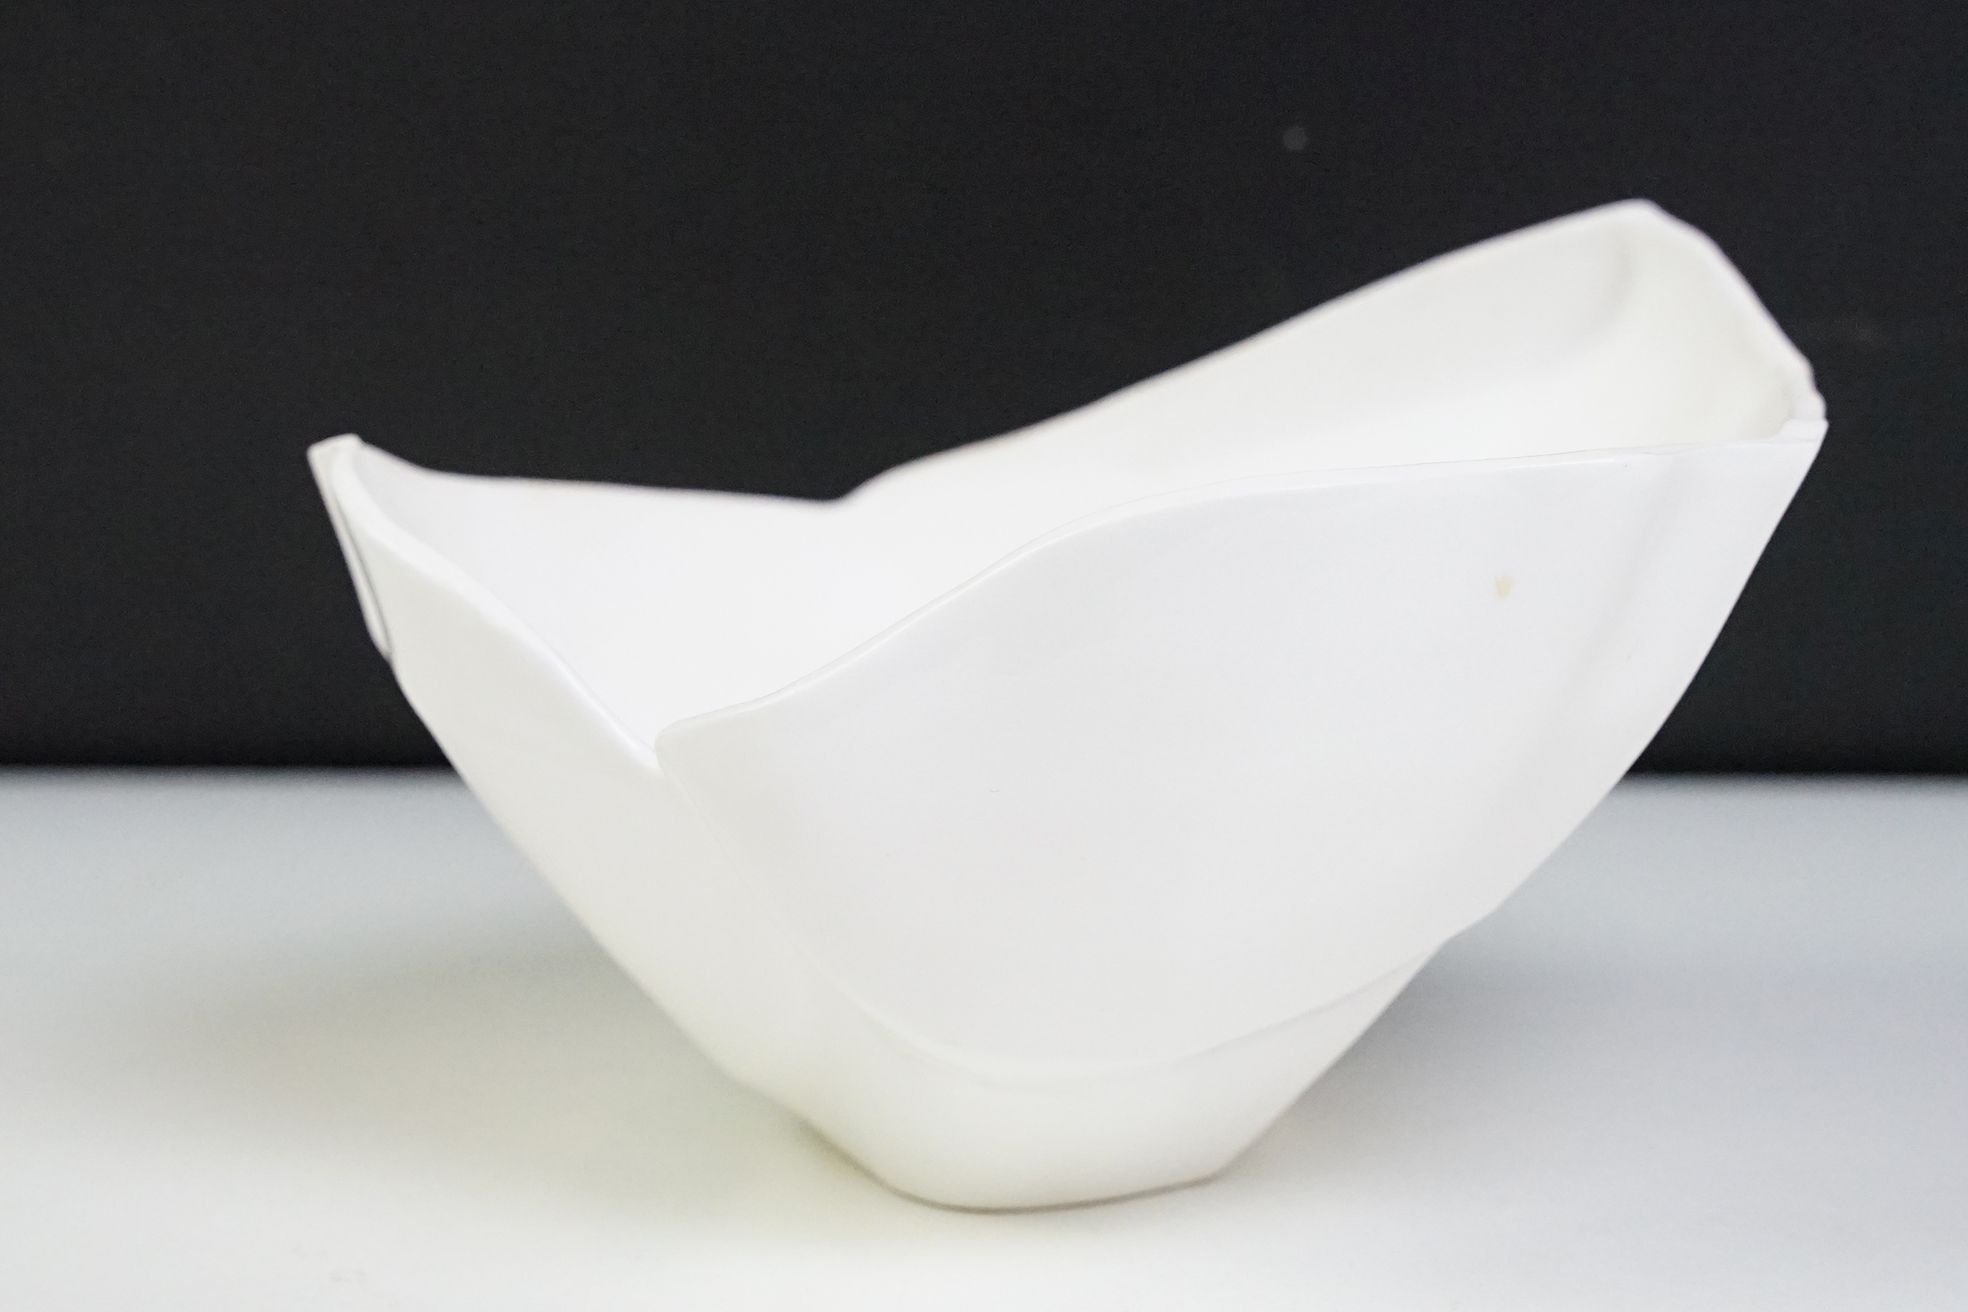 Frank Gehry for Tiffany & Co white ceramic rock series bowl. Tiffany & co mark to base along with - Image 5 of 10